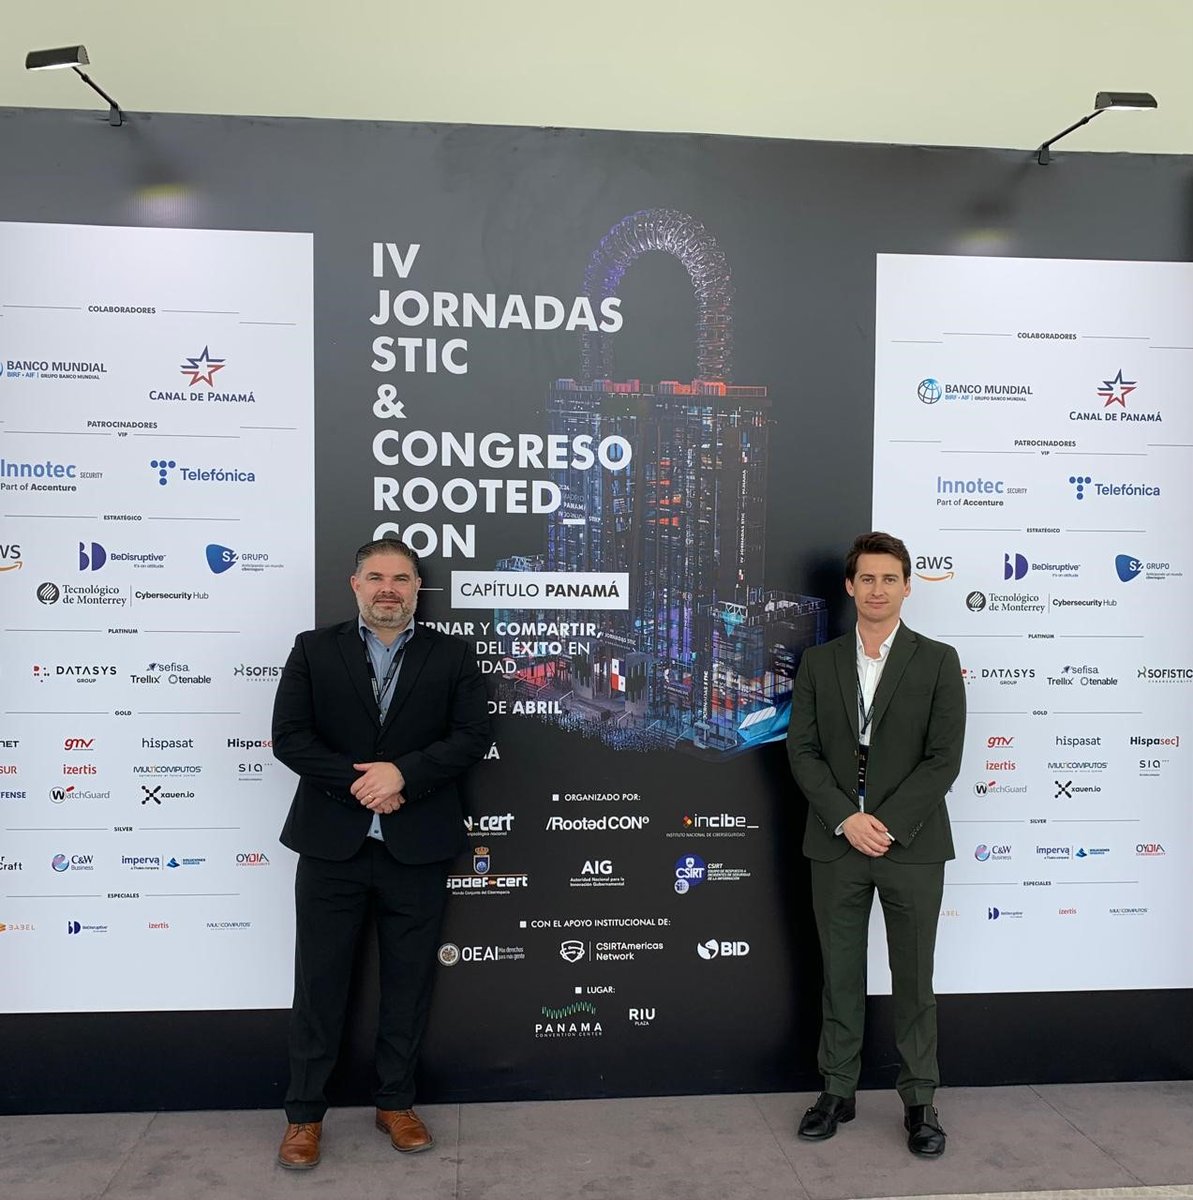 Last week colleagues were in 🇵🇦 attending the IV Jornadas STIC conference. Productive conversations around better cyber coordination in the Americas took place, alongside one's on vulnerability scanning🌐